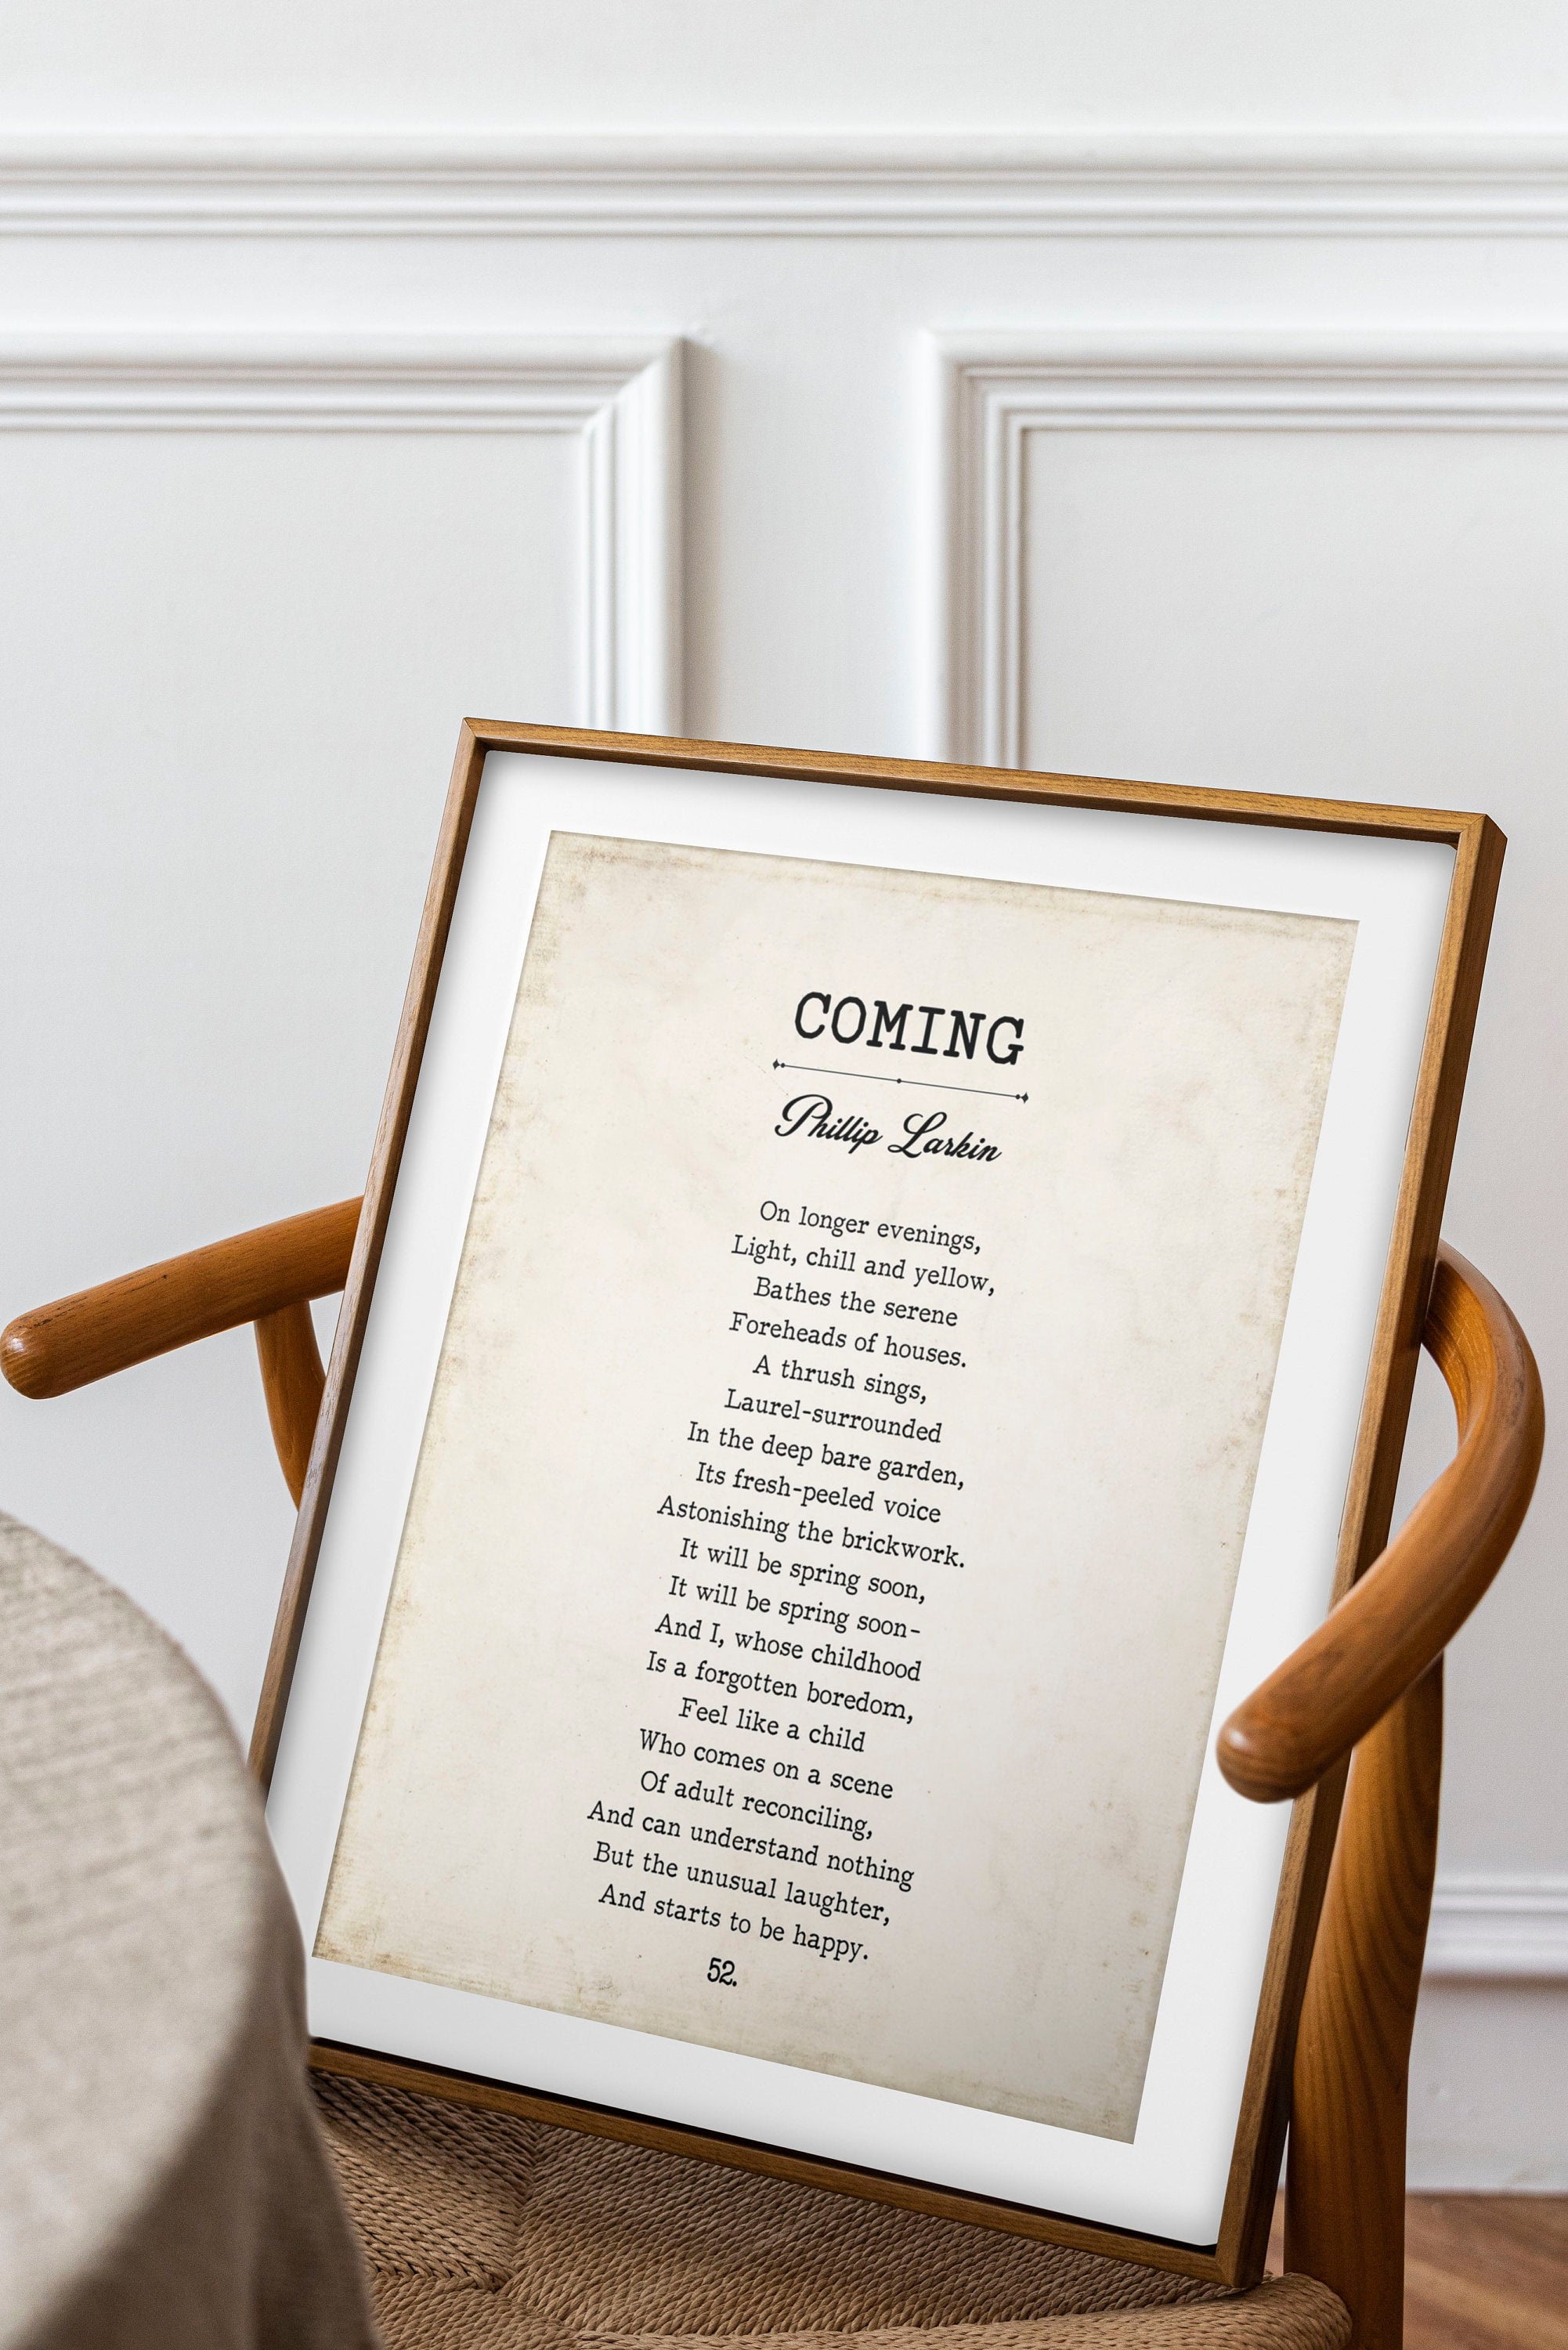 Coming Poem by Phillip Larkin Inspirational Print, Poetry Vintage Book Page Art Print, It Will Be Spring Soon Wall Art Unframed and Framed